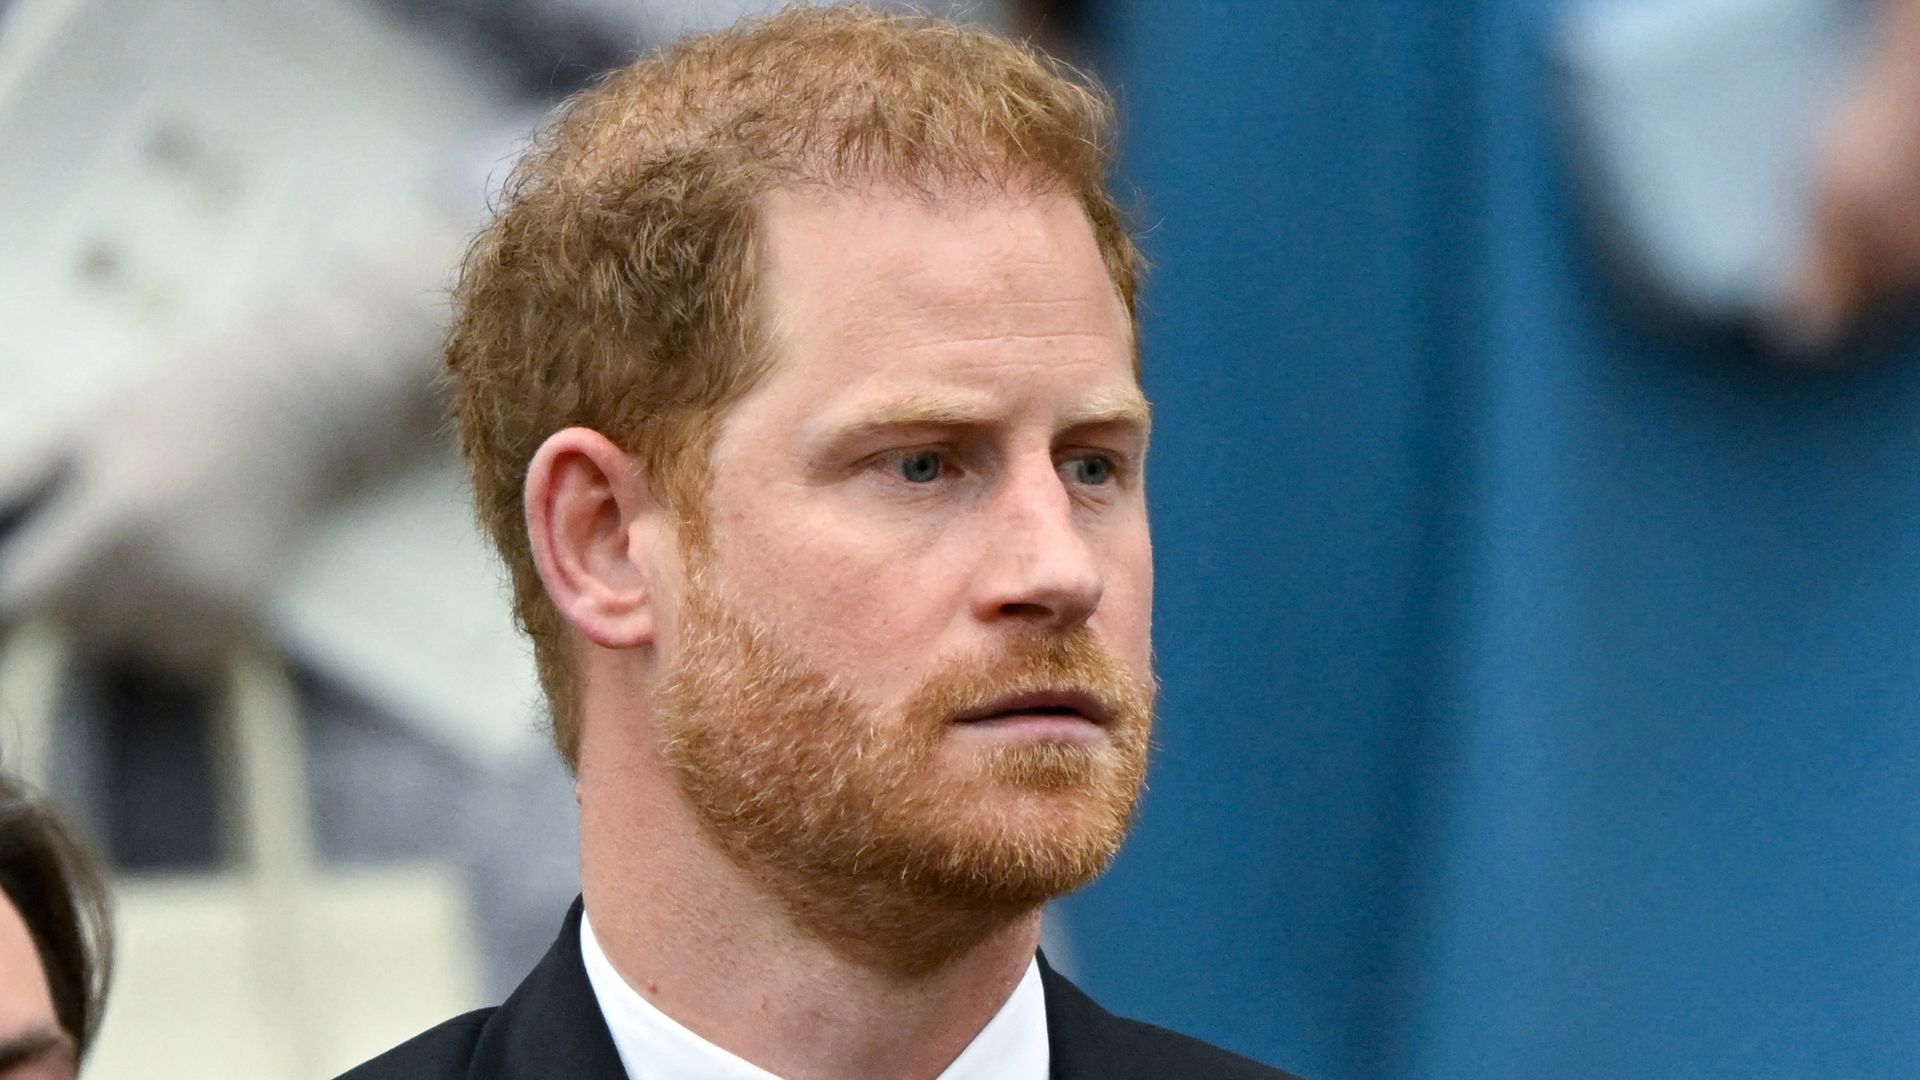 Prince Harry flew to LA straight after the coronation service